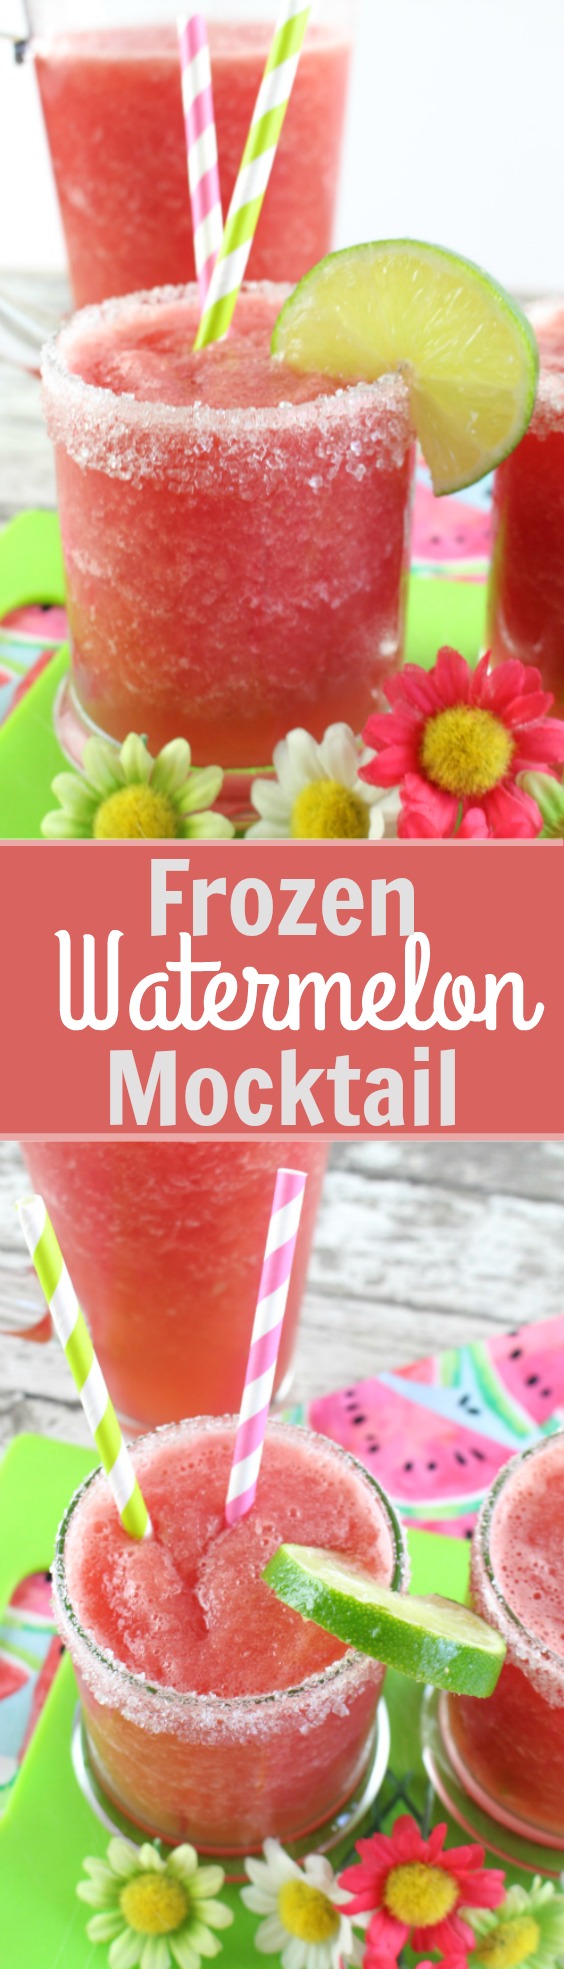 Frozen Watermelon Mocktail - Fresh watermelon, frozen limeade, and sugar comes together to make a refreshing and vibrant summer drink!